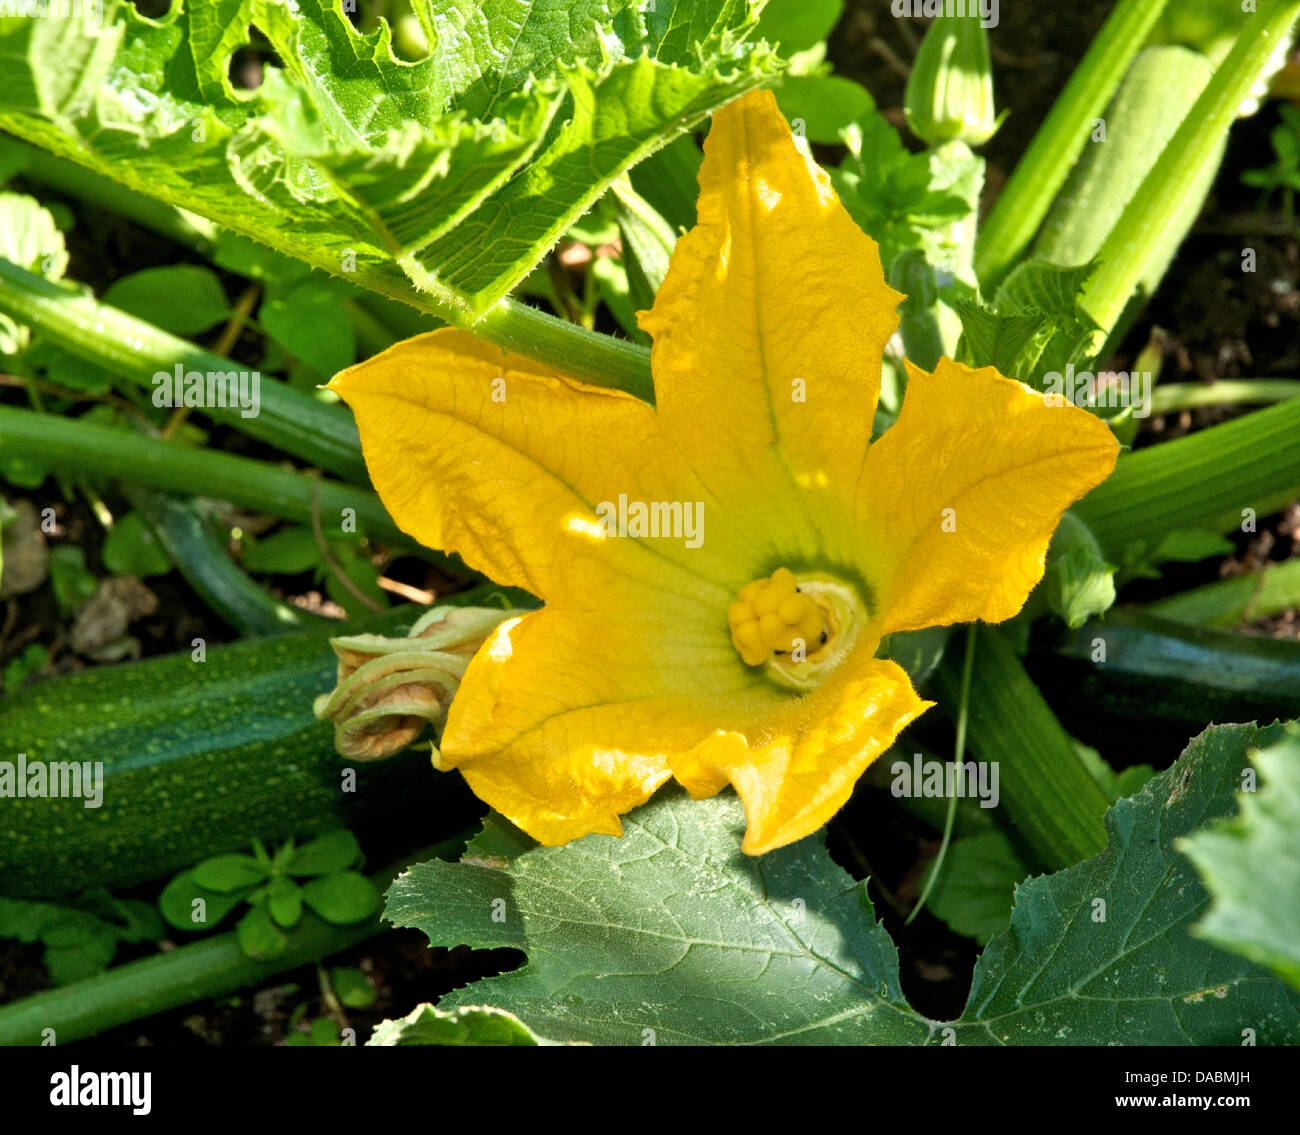 Courgette flowers growing on plant in a garden Stock Photo